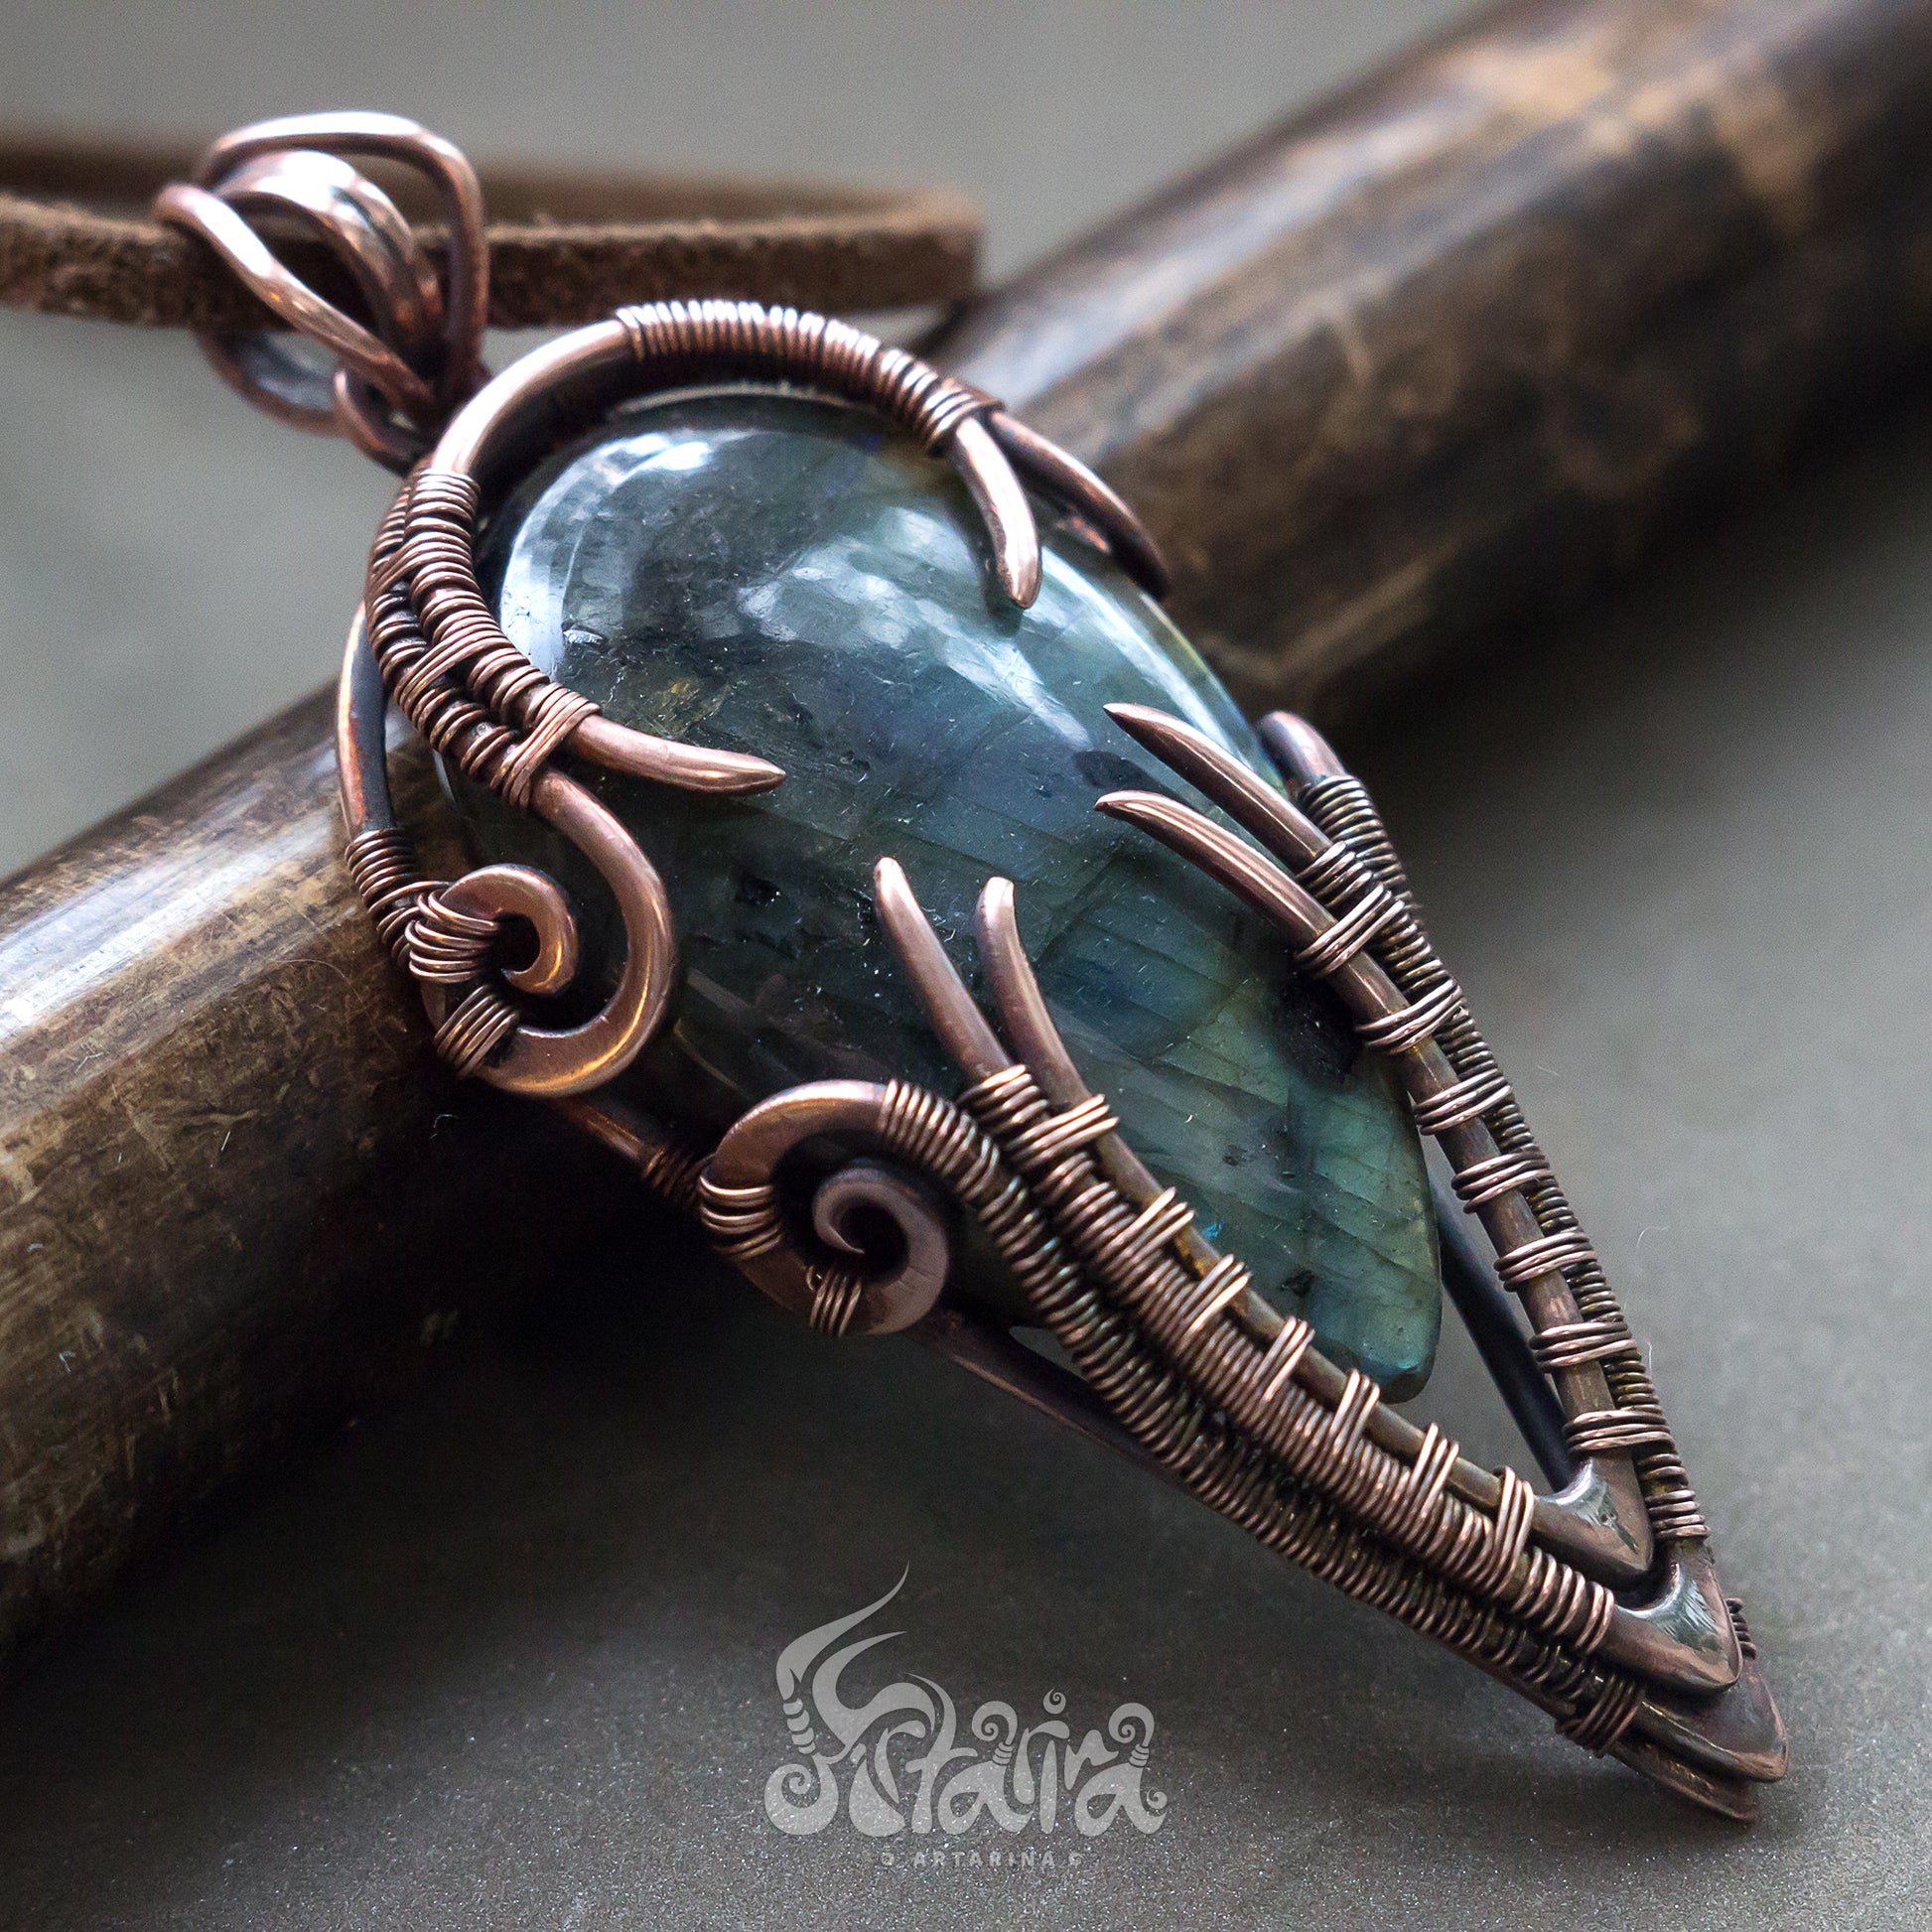 Wire wrapped necklace with stone. Copper wirewrap pendent Natural labradorite stone wirework handcrafted necklace Mens pendant Pagan wirework jewelry necklace handmade handcrafted antiqued copper jewelry piece with multicolored labradorite stone